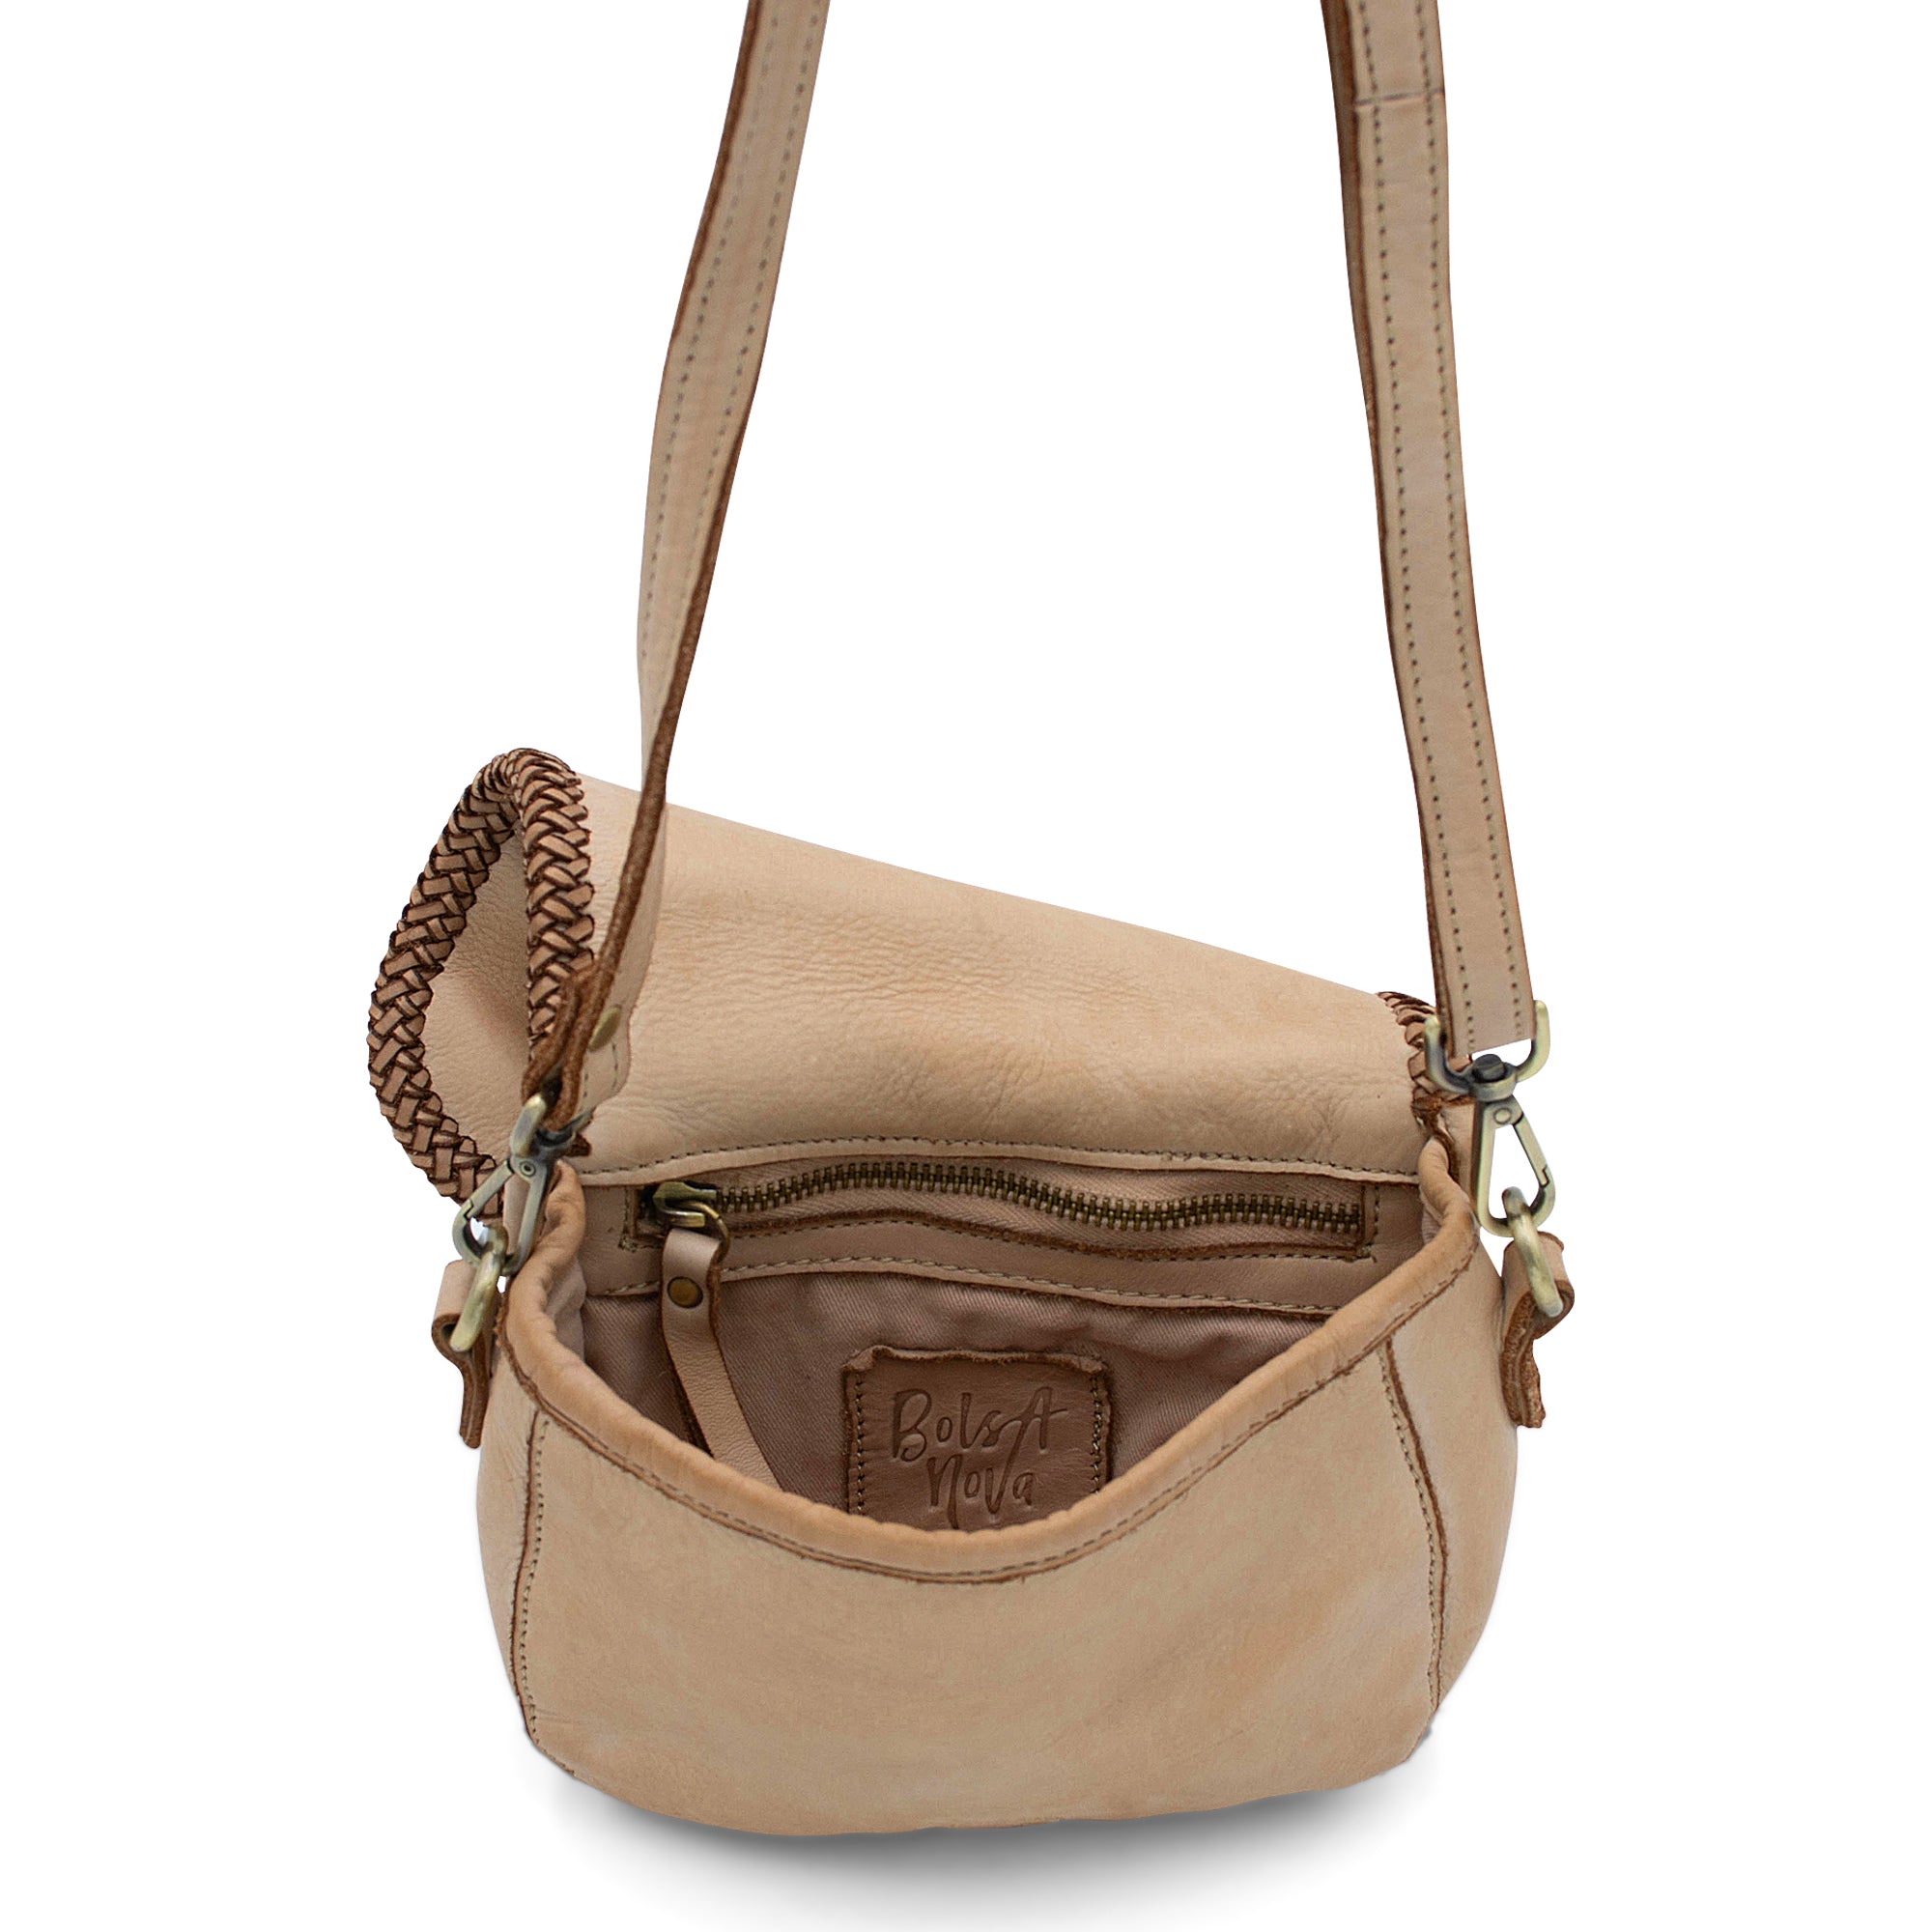 Naples Saddle Bag in Light Taupe